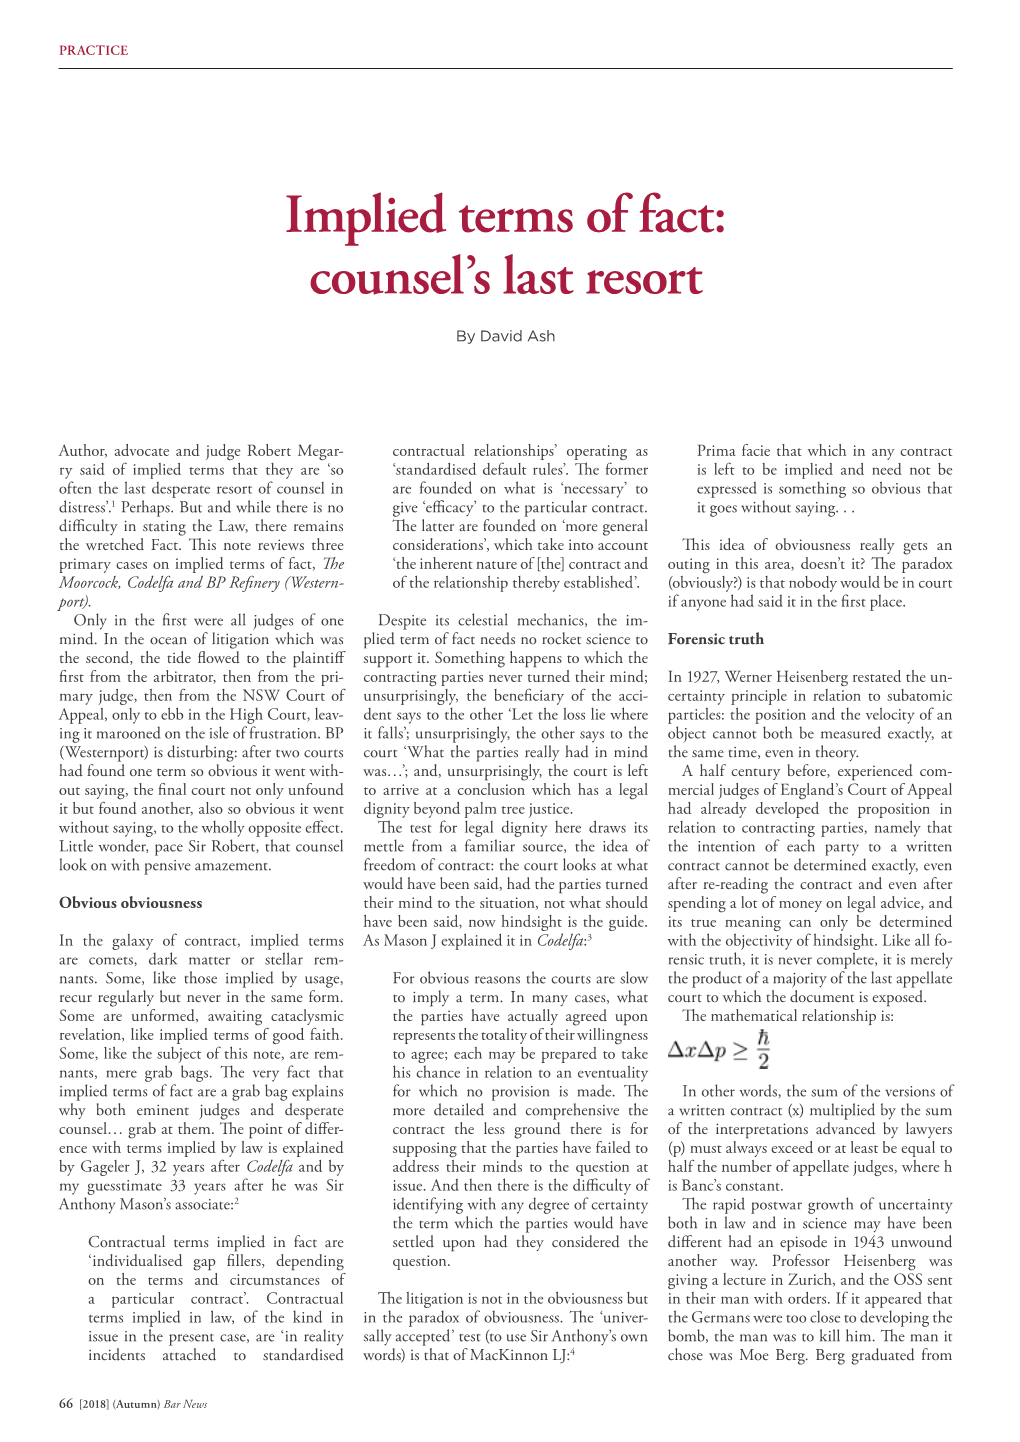 Implied Terms of Fact: Counsel’S Last Resort